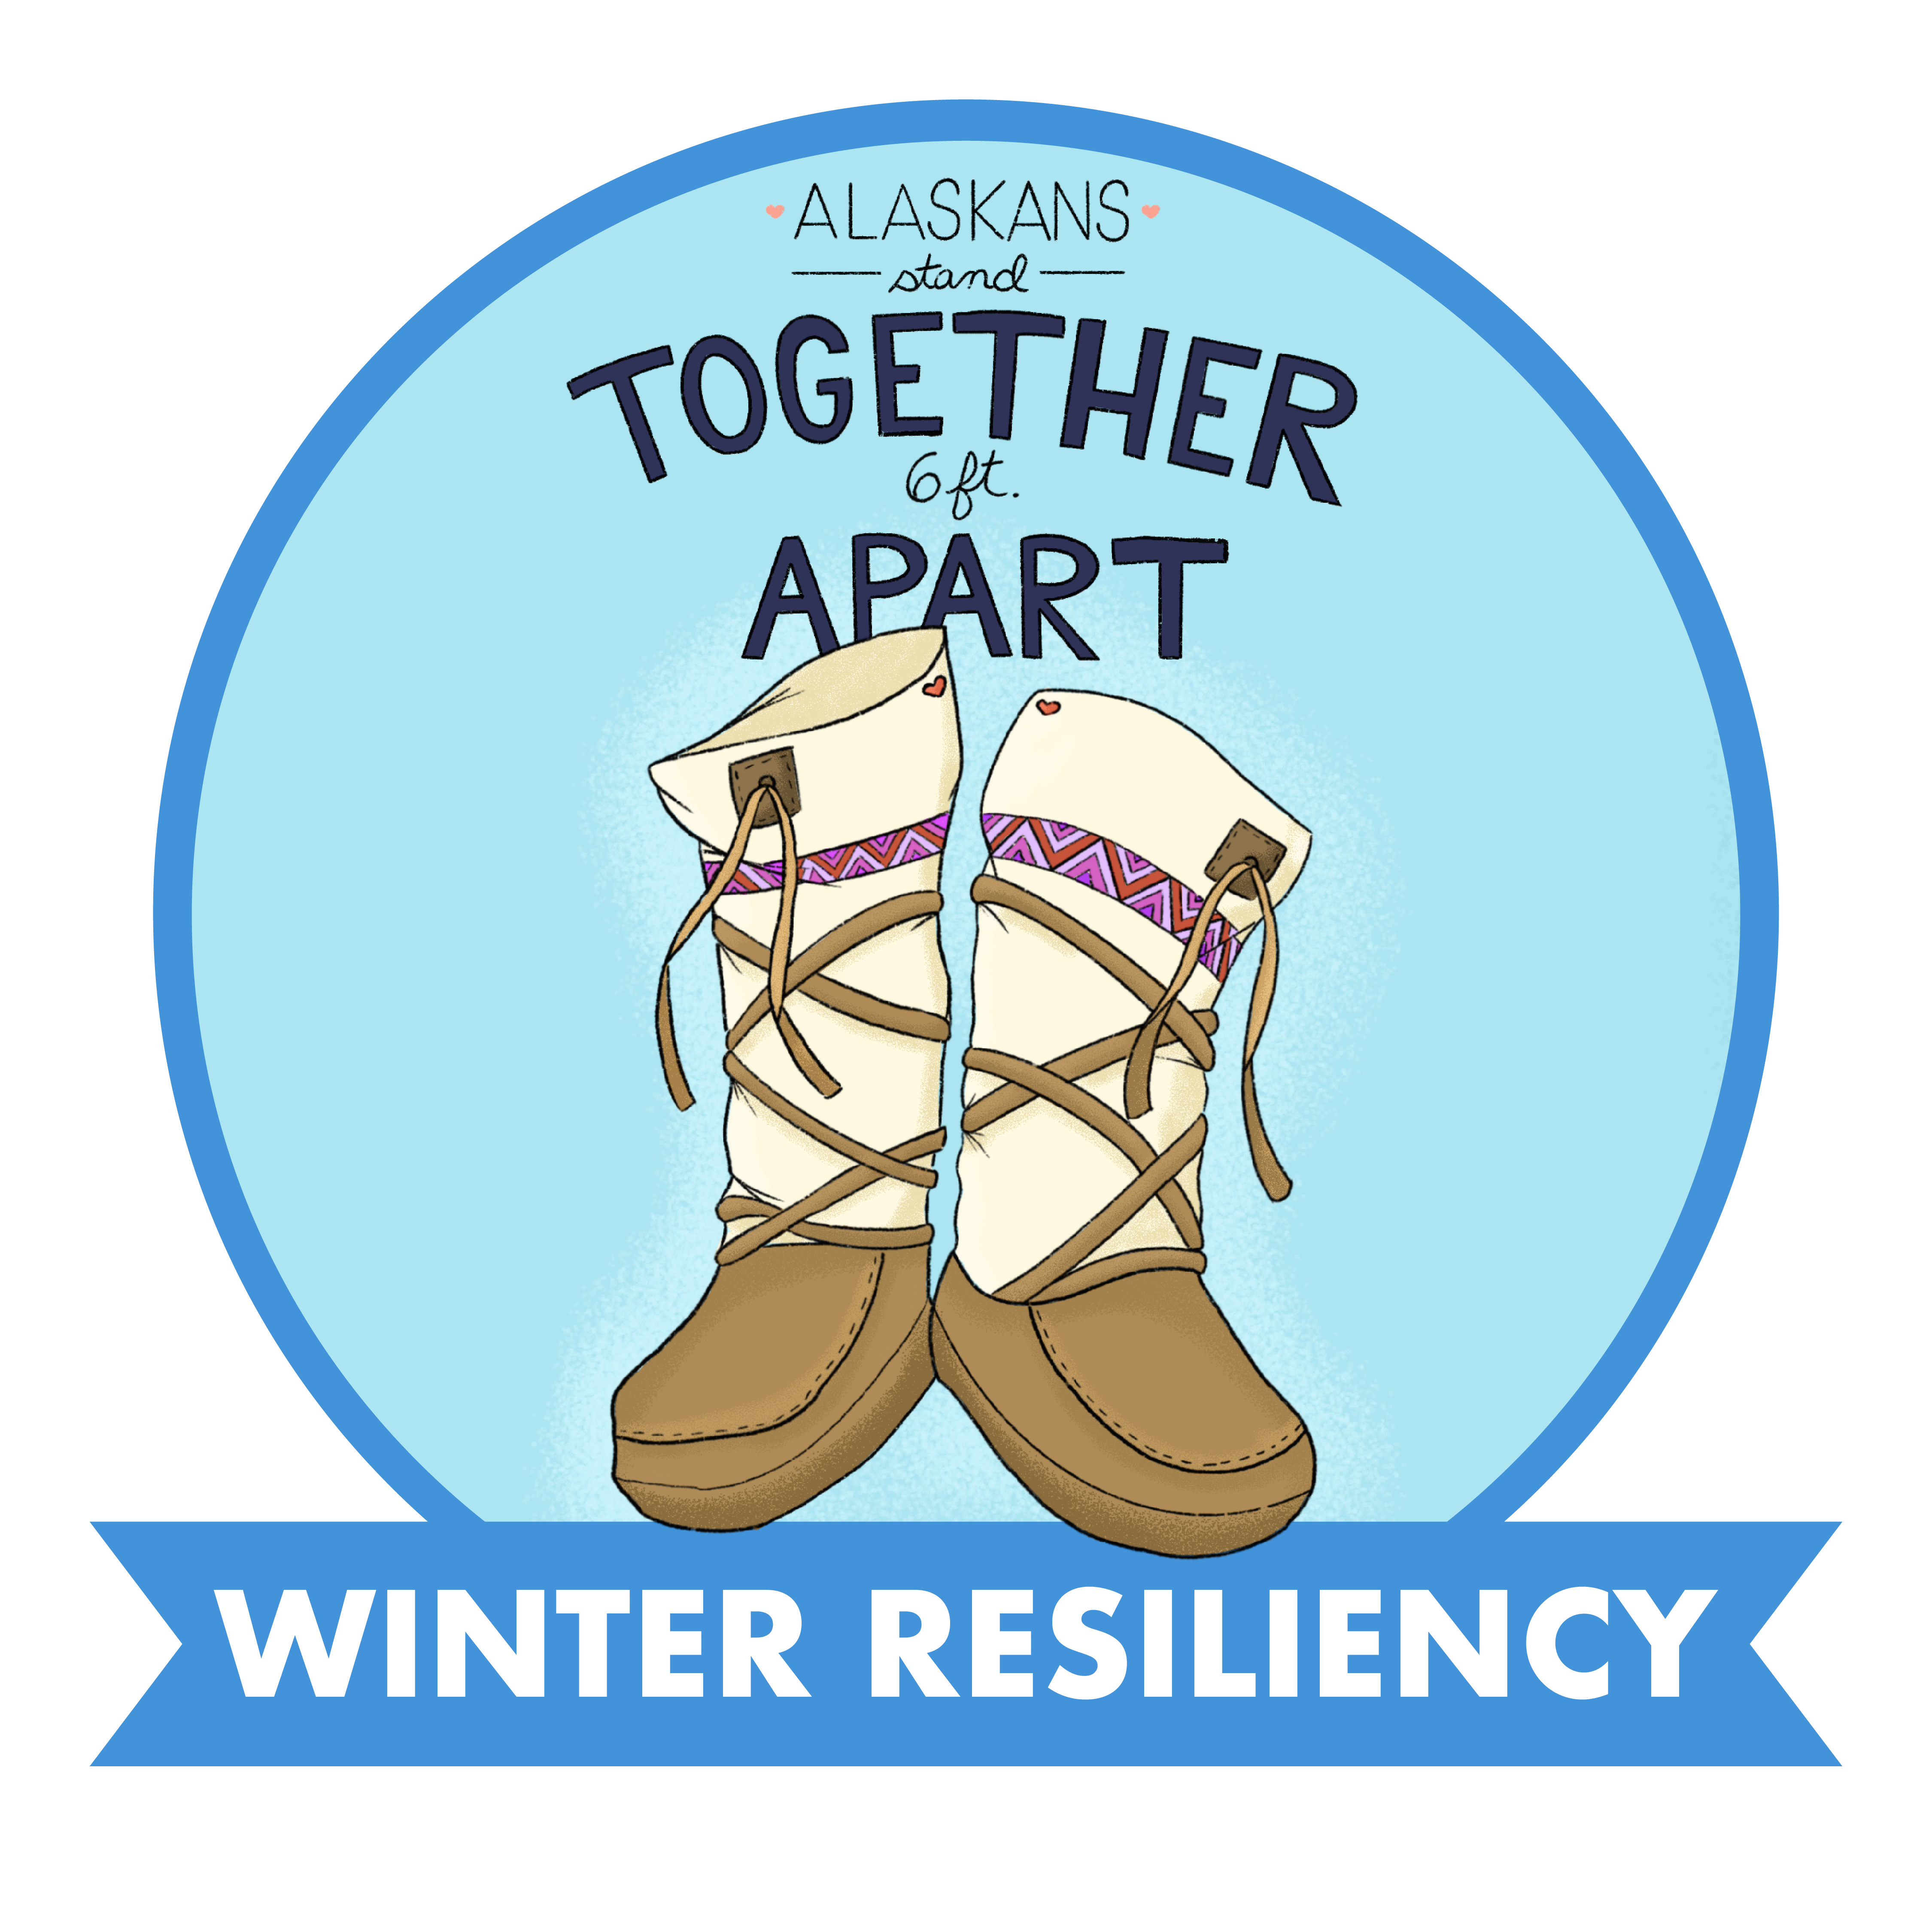 Winter resiliency: Alaskans stand together 6 feet apart